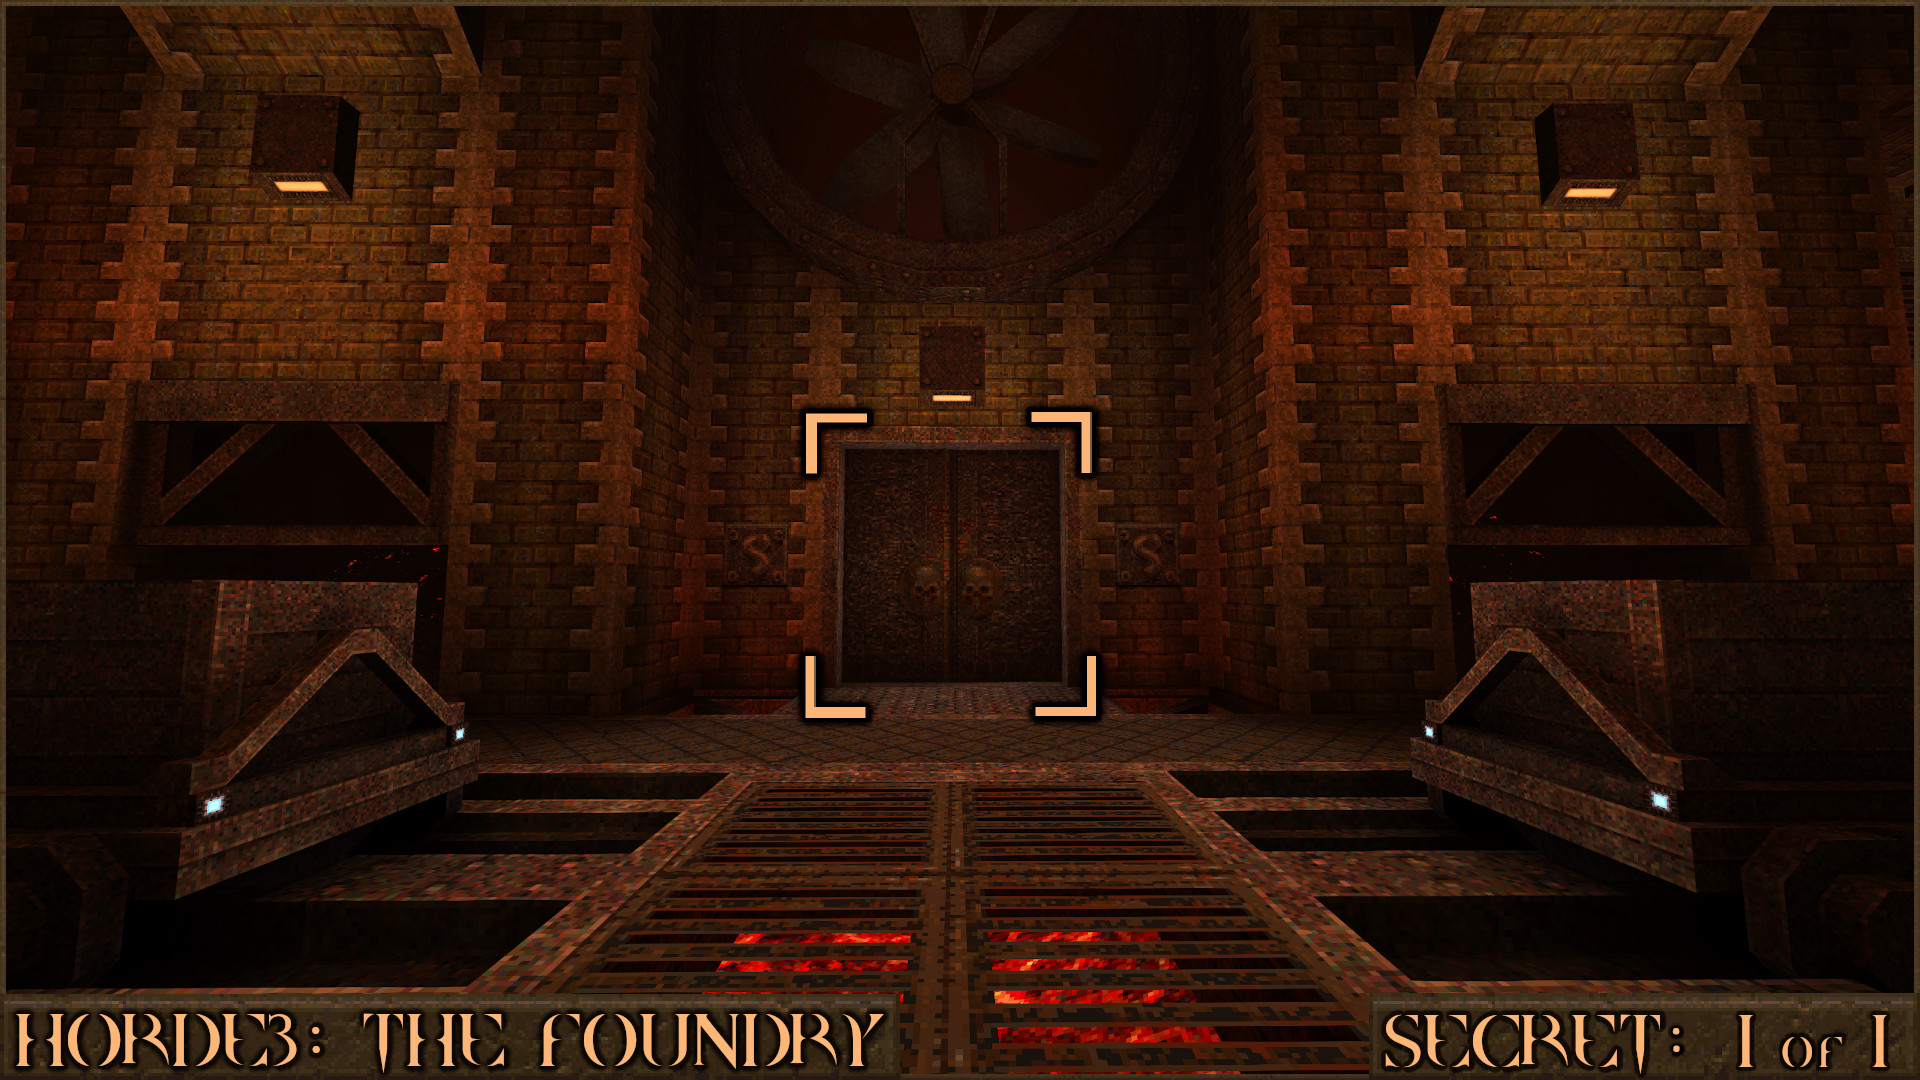 Quake - Finding all the Secrets - HORDE3: The Foundry - A441B3D